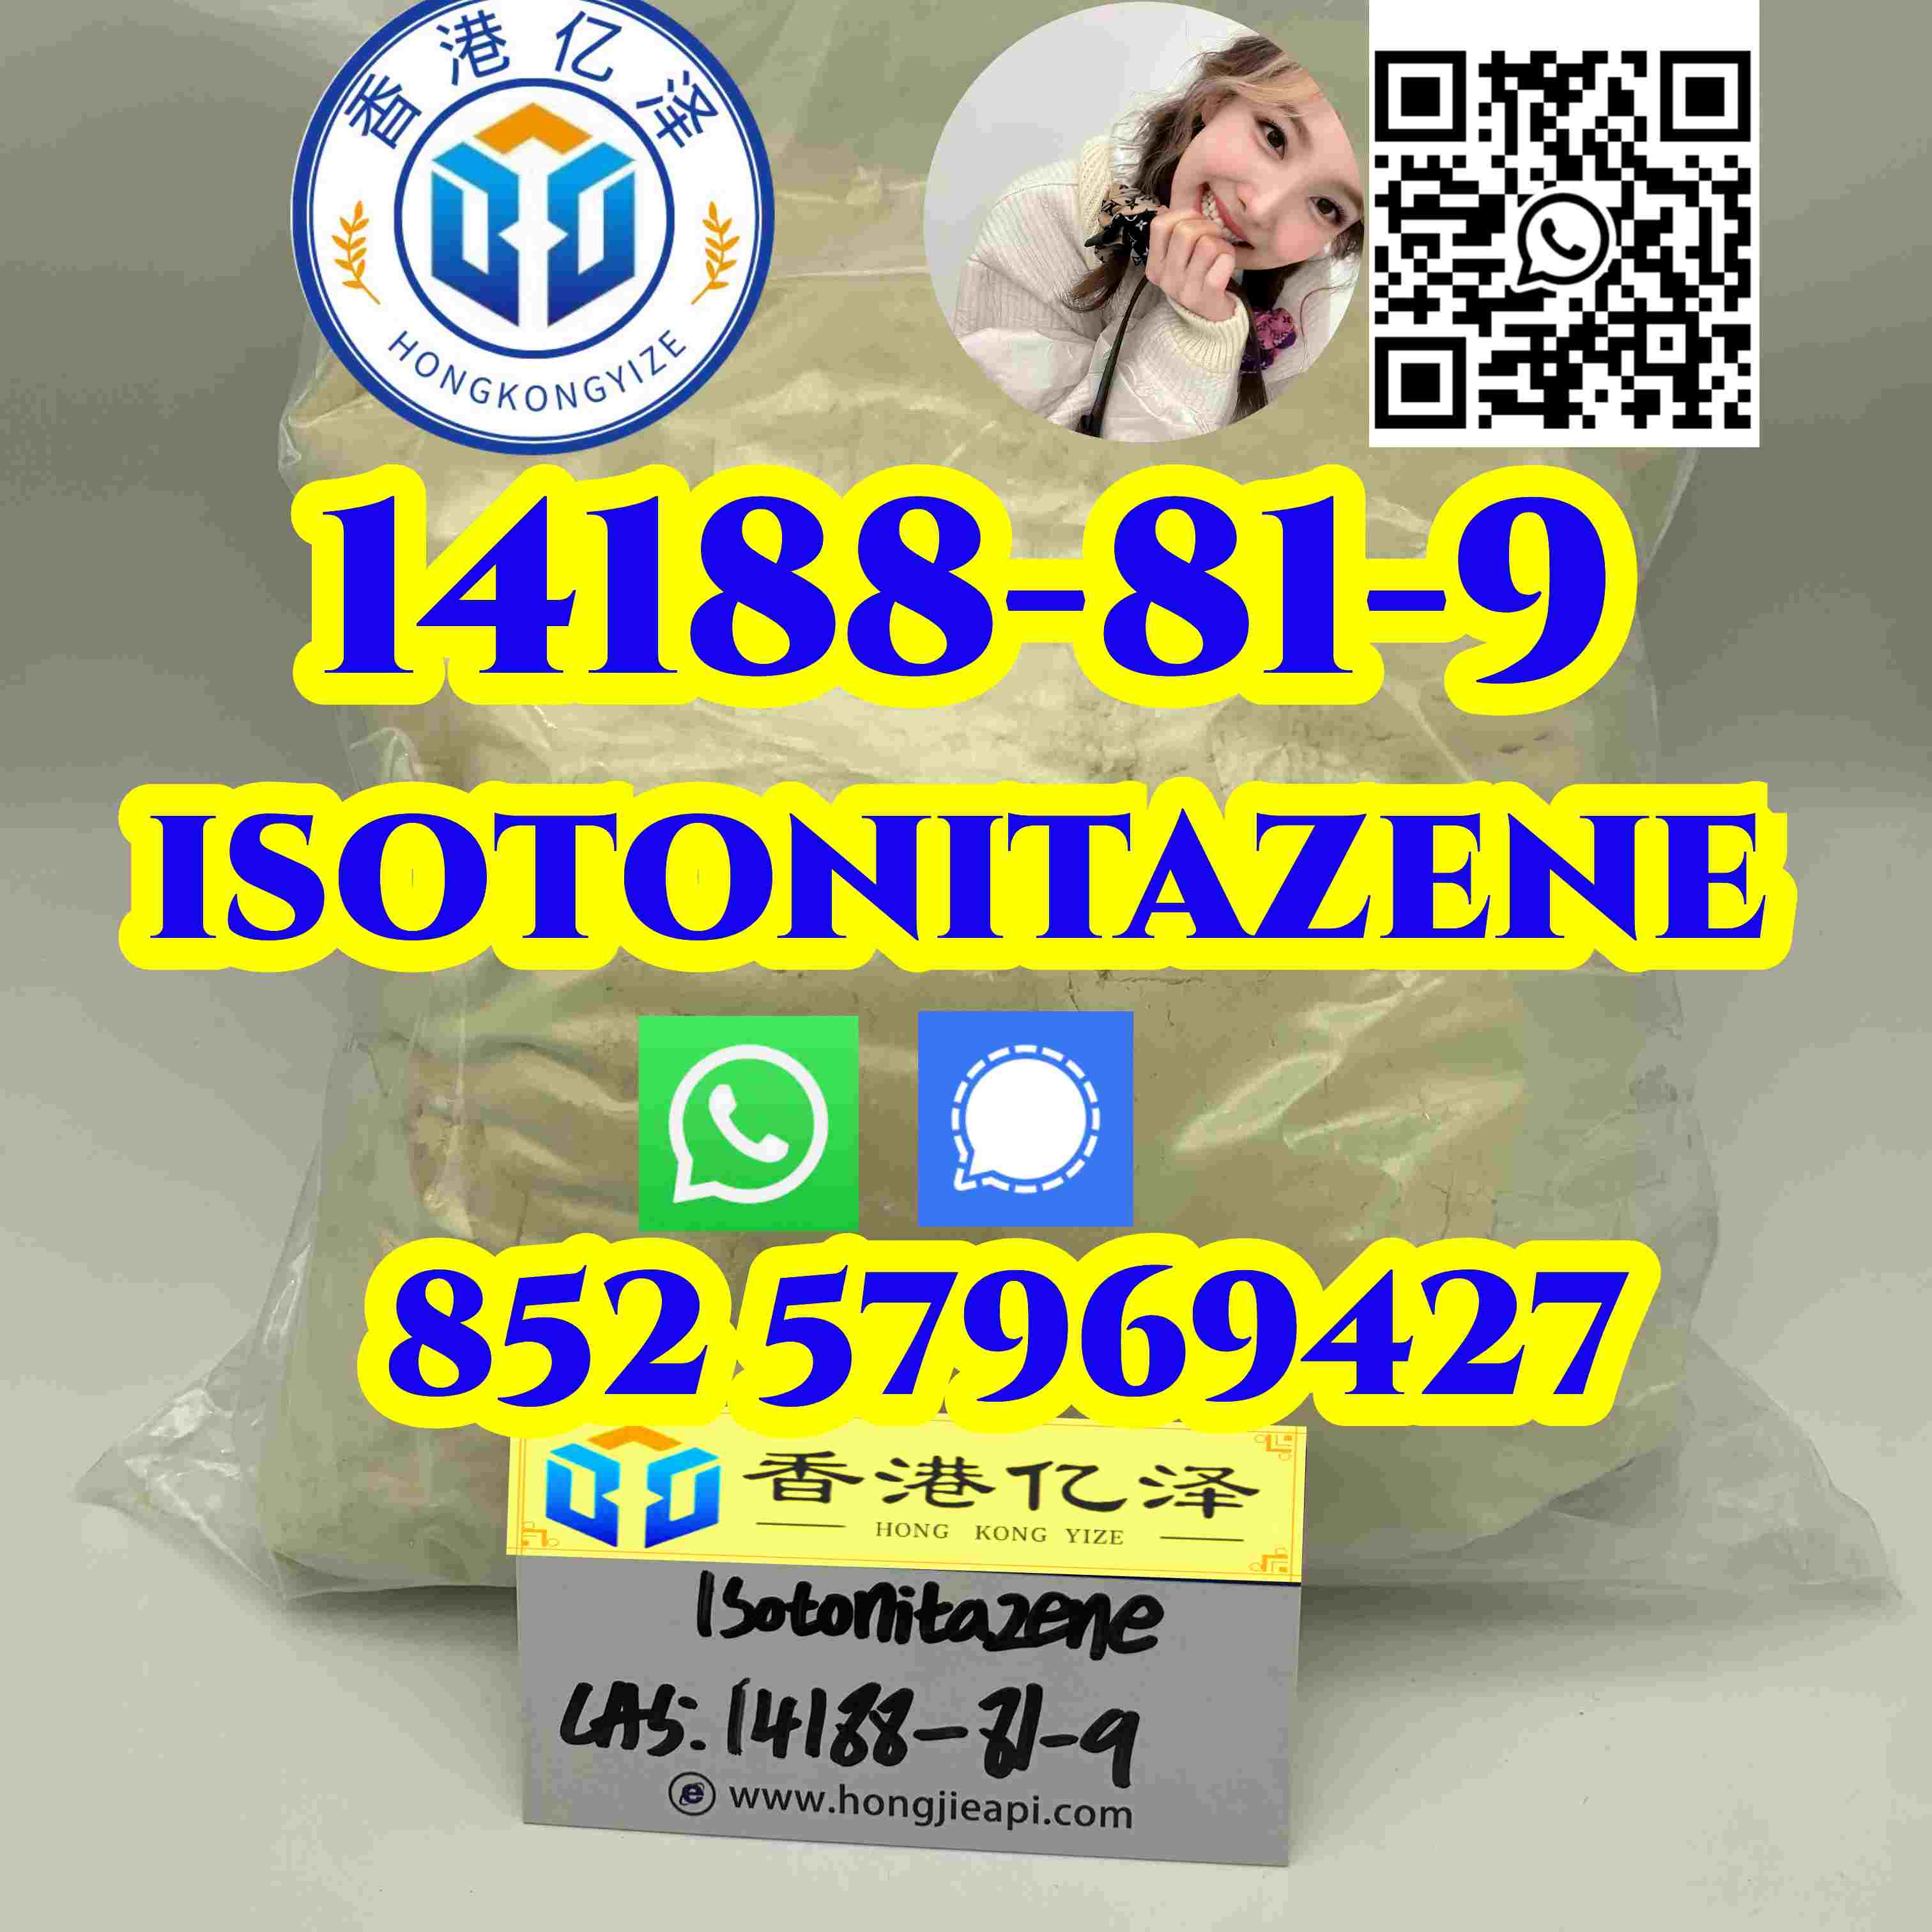 14188-81-9 isotonitazene low price Safe delivery - photo